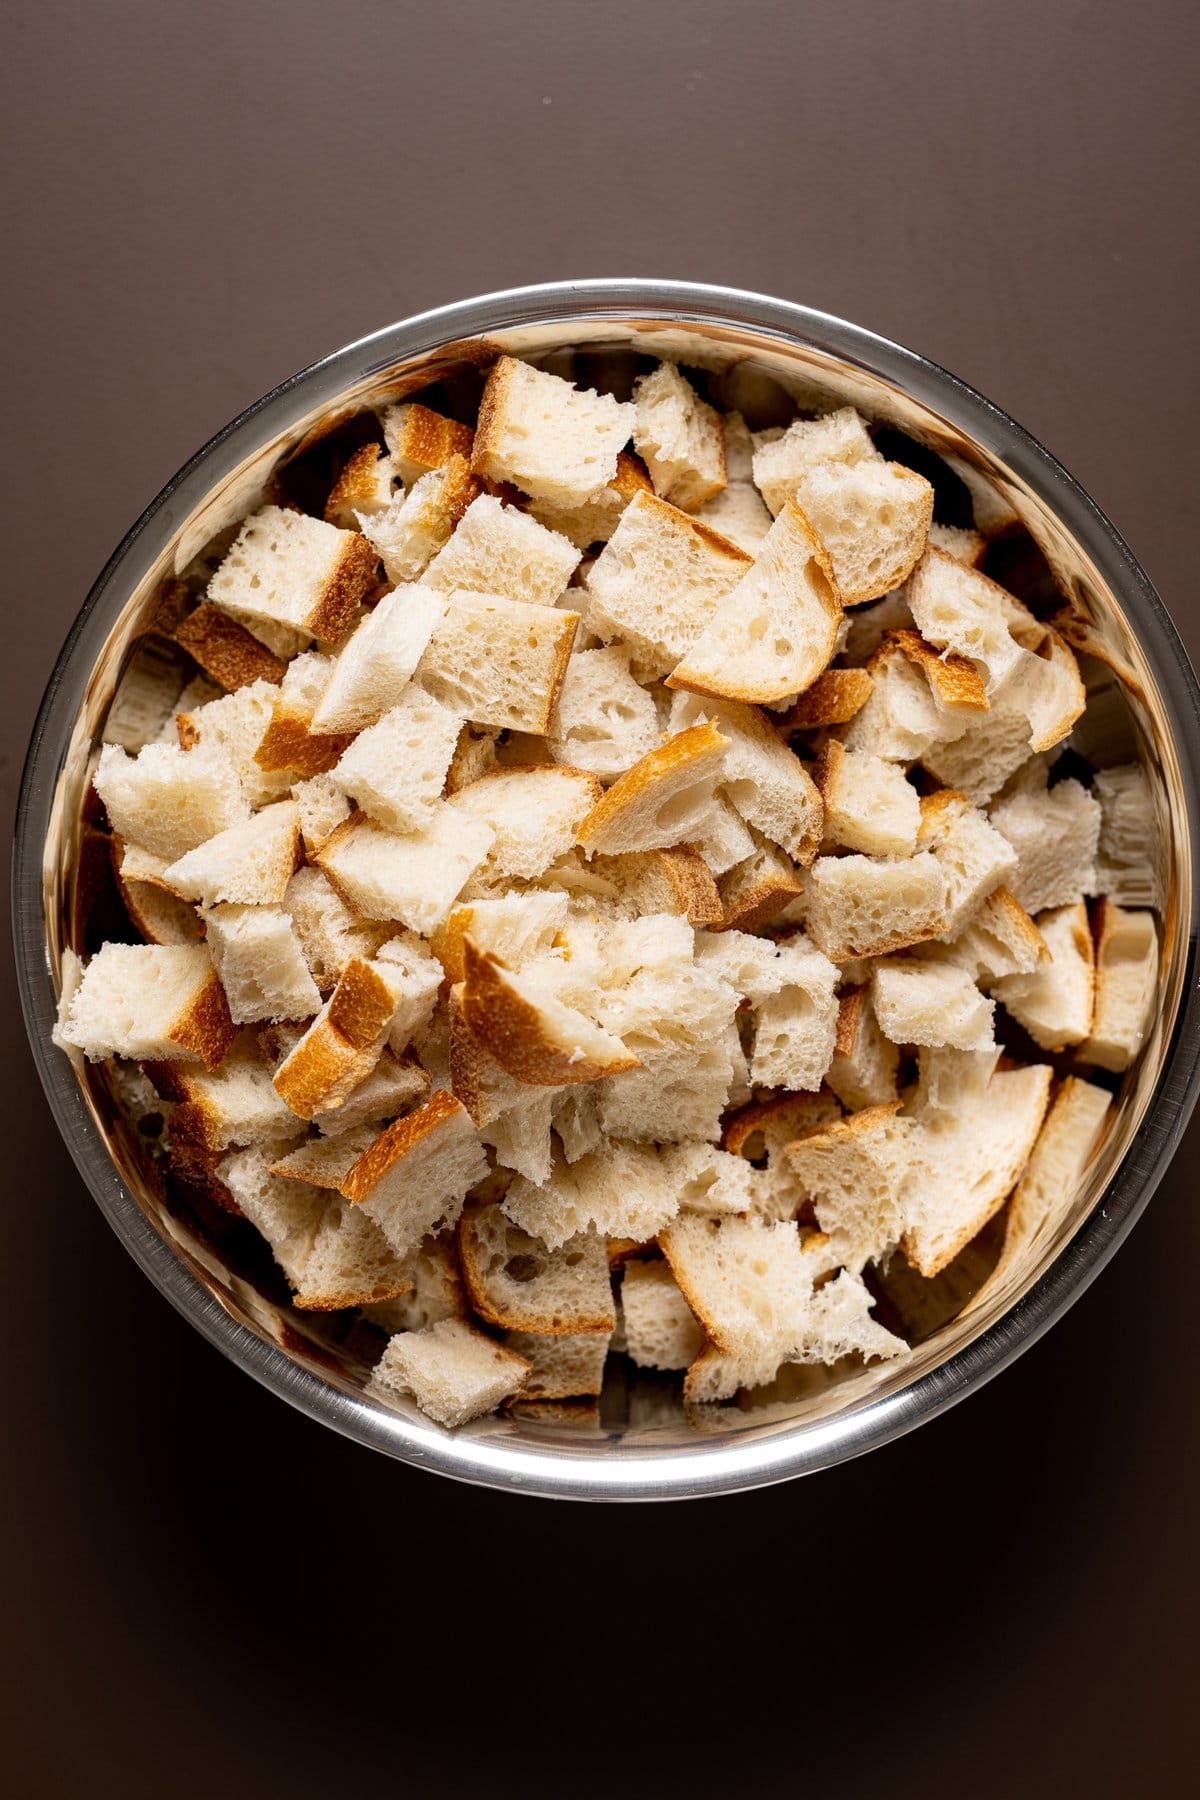 Bowl of small pieces of bread